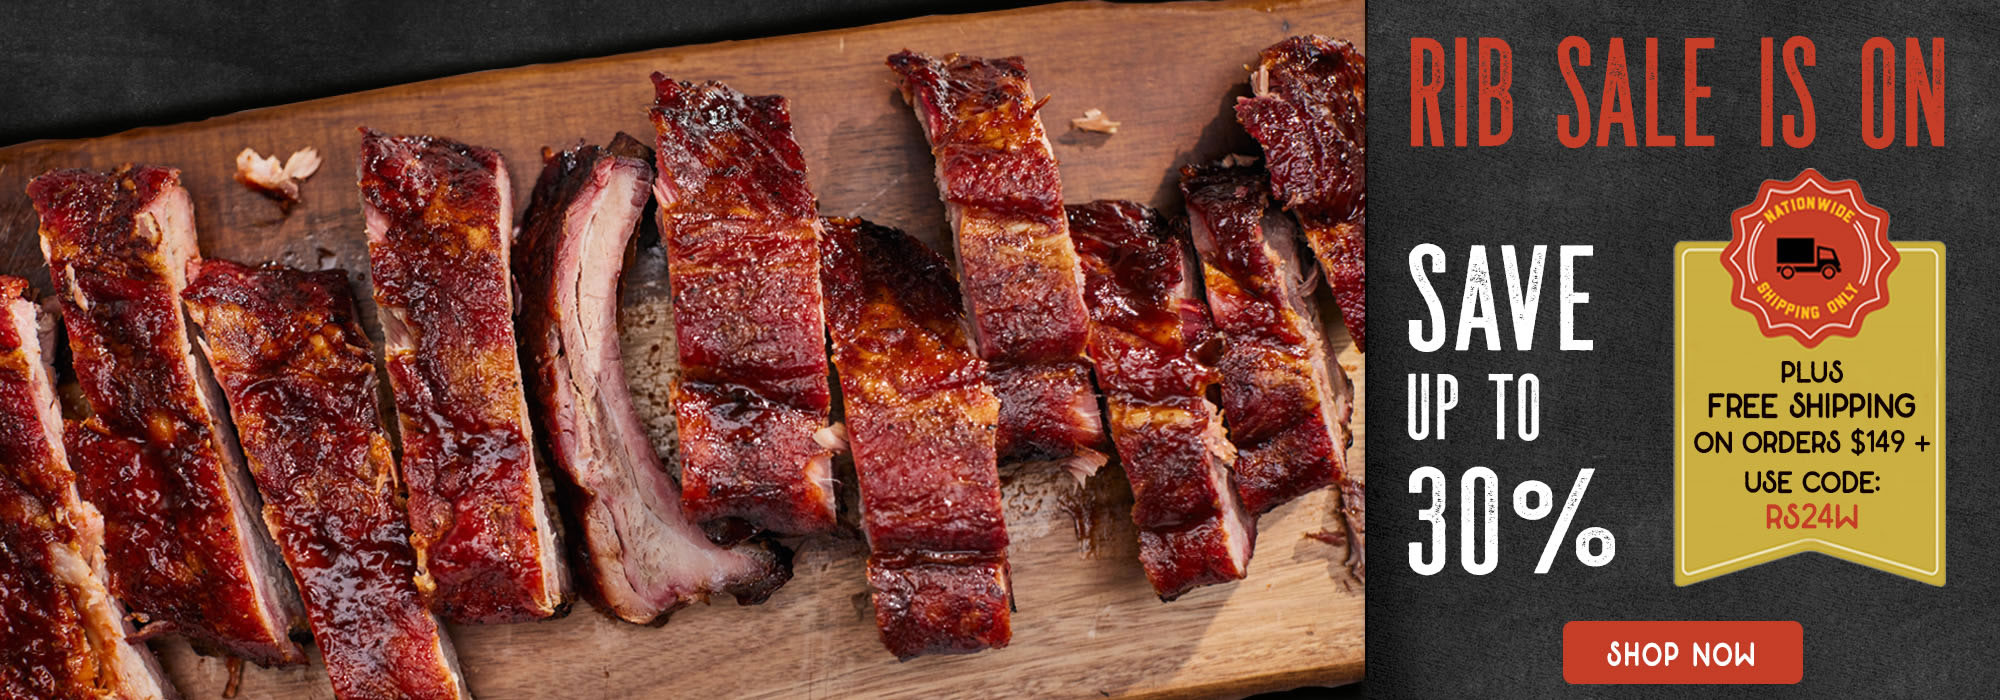 Rib Sale is on...Save up to 30%...Plus free shipping on orders $149+ - use code RS24W